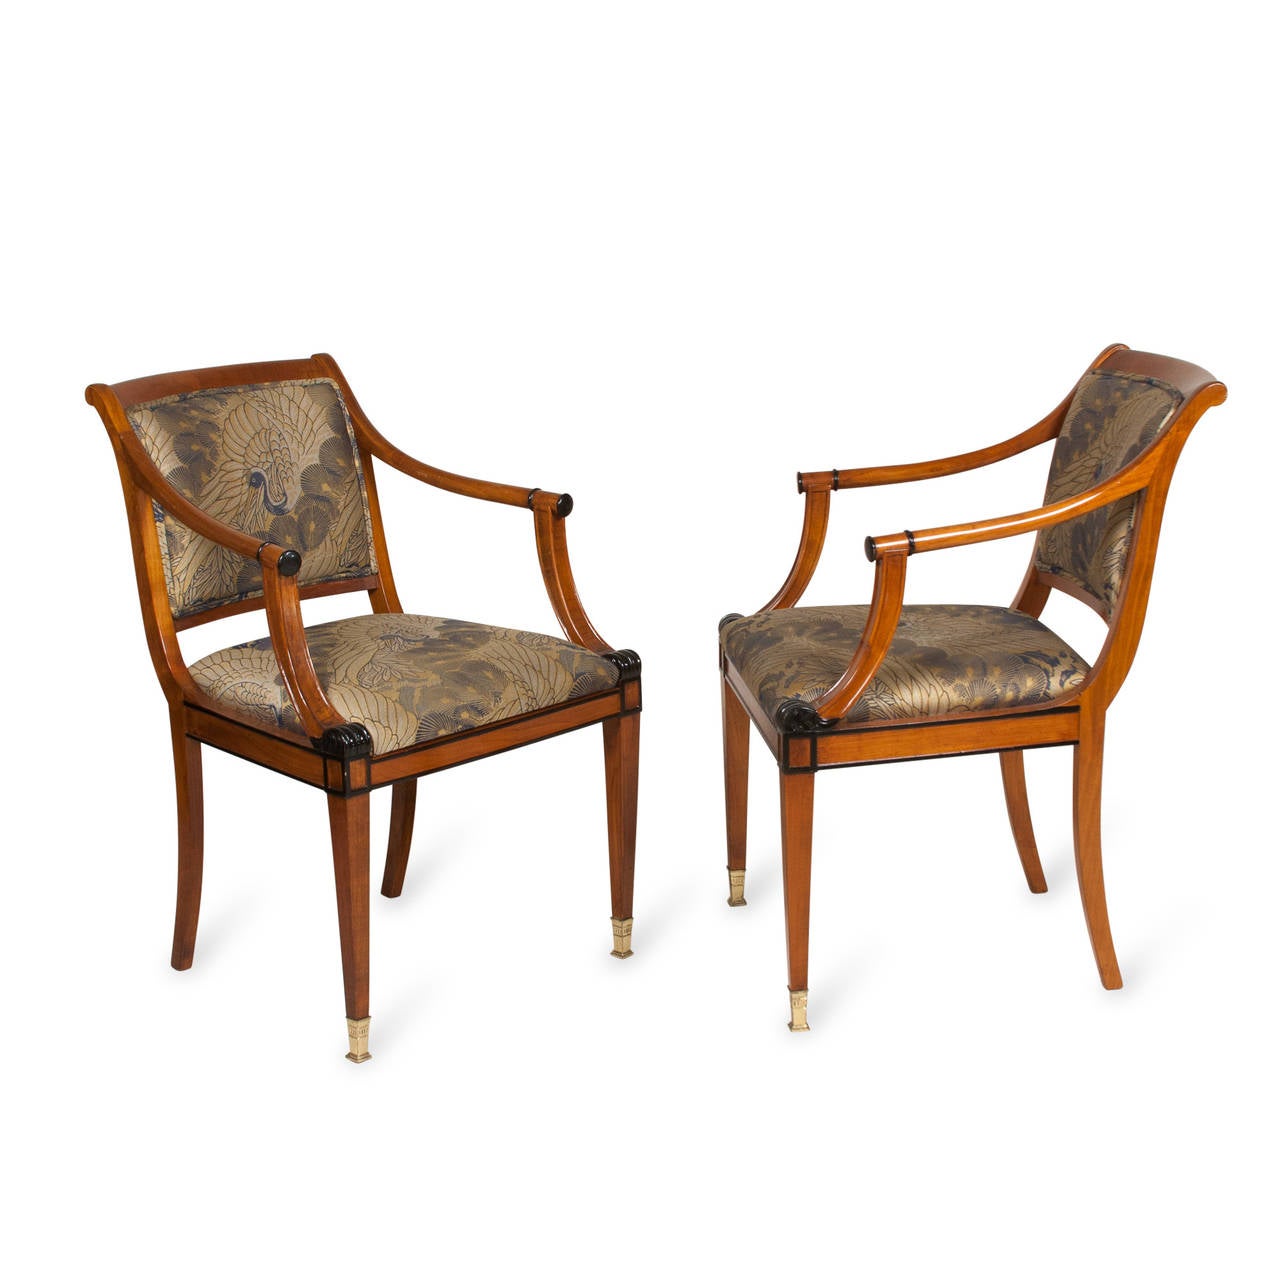 Pair of fruitwood Empire style open armchairs, gracefully arced turned arms ending in ebonized accent, the ebonized accent repeated on the front seat corner, tapered legs, bronze sabots, original silk upholstery, American 1990s. Back height 33 in,